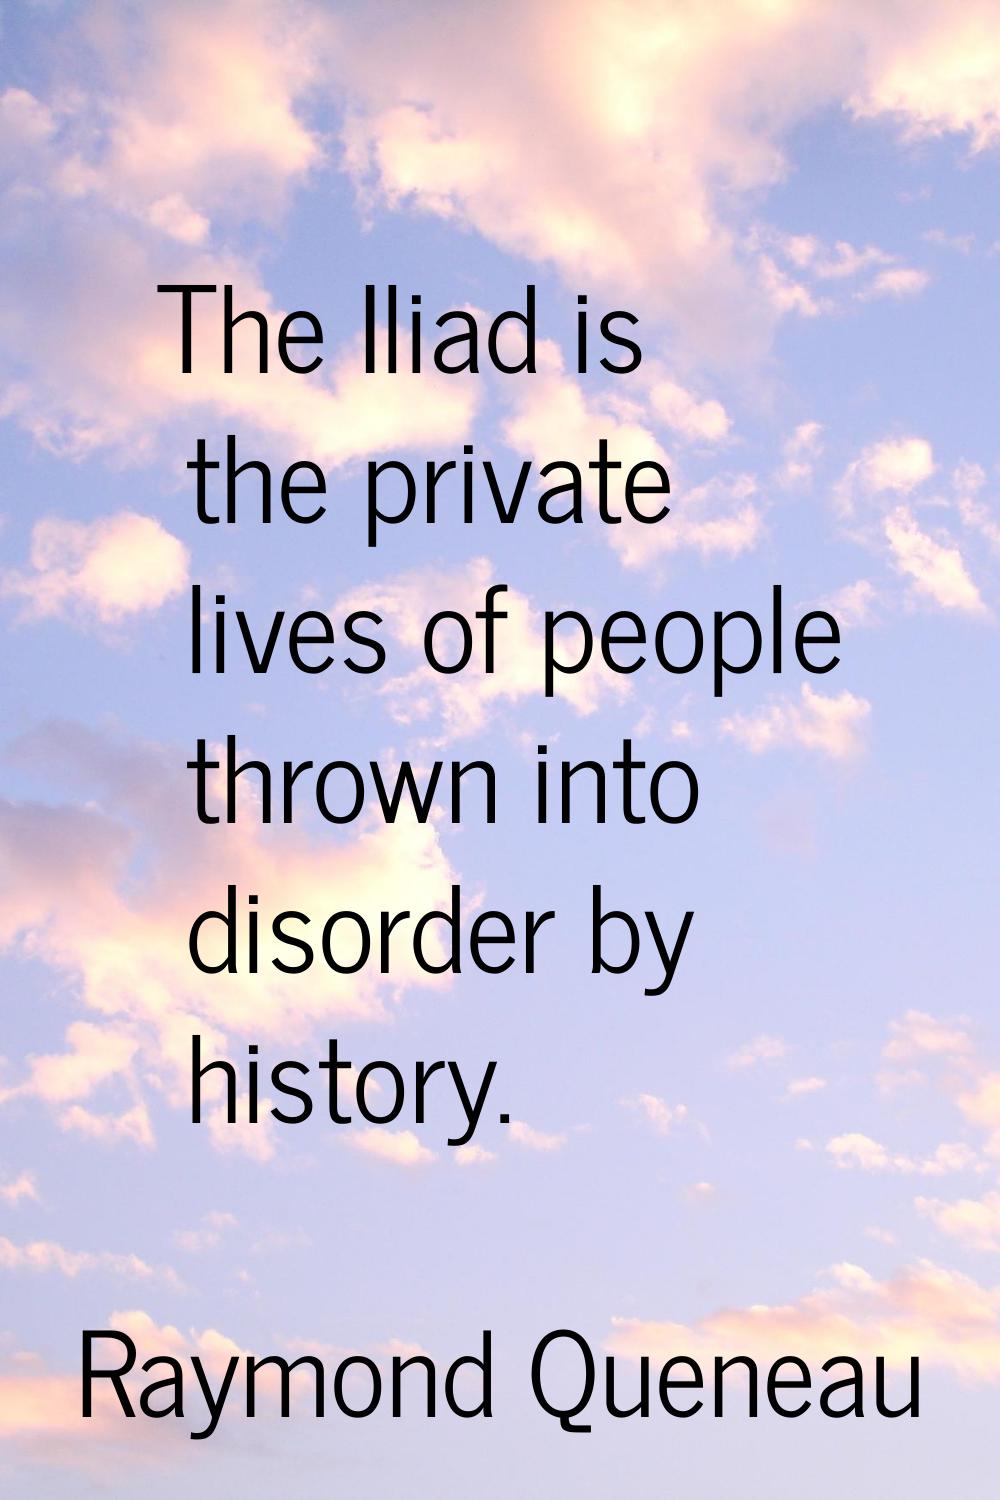 The Iliad is the private lives of people thrown into disorder by history.